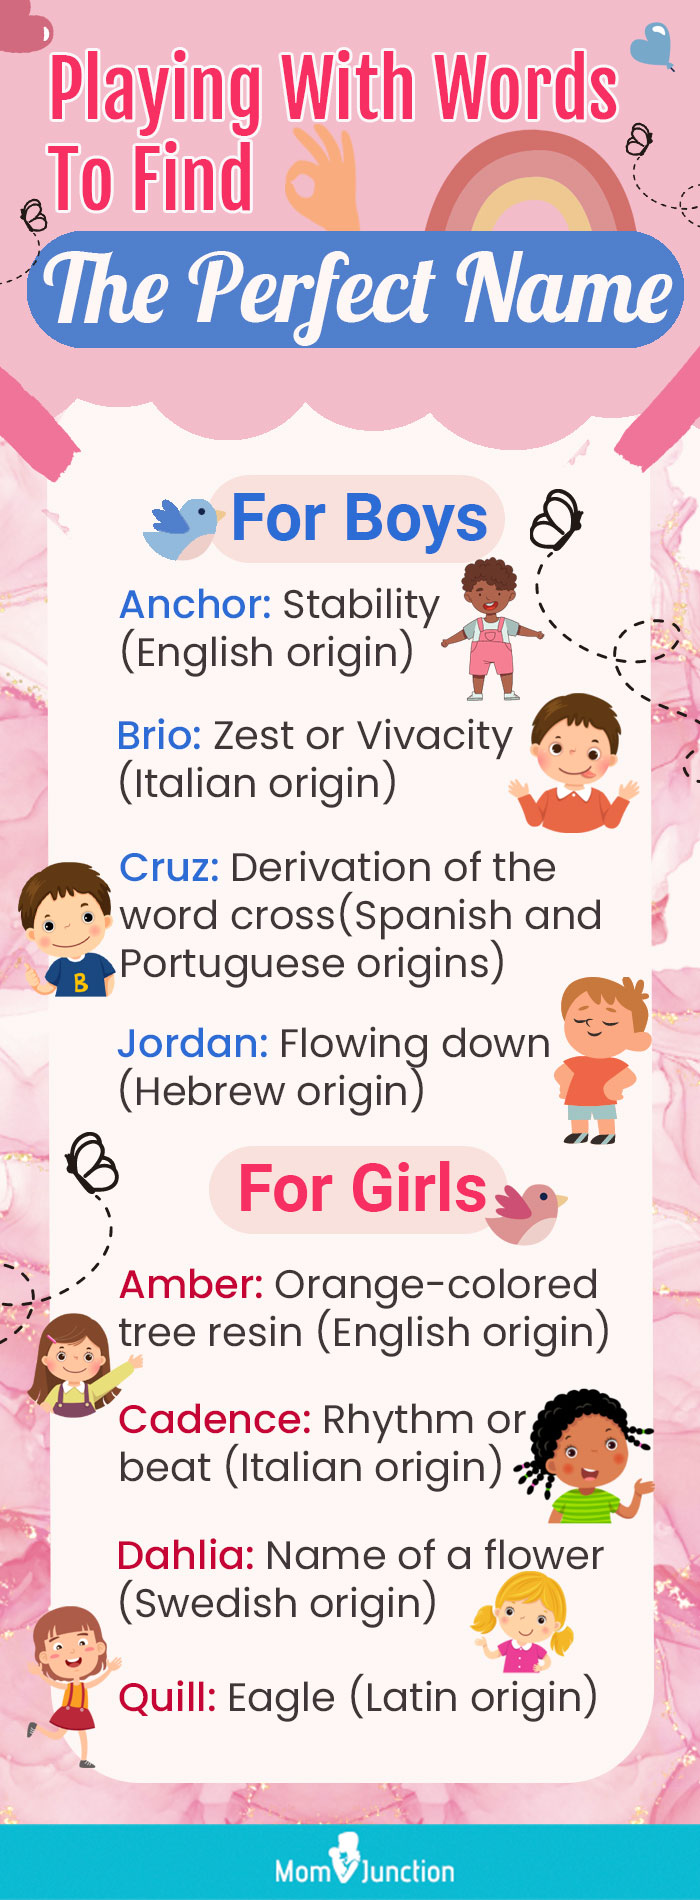 300 Wonderful Word Names From Dictionary, For Boys & Girls